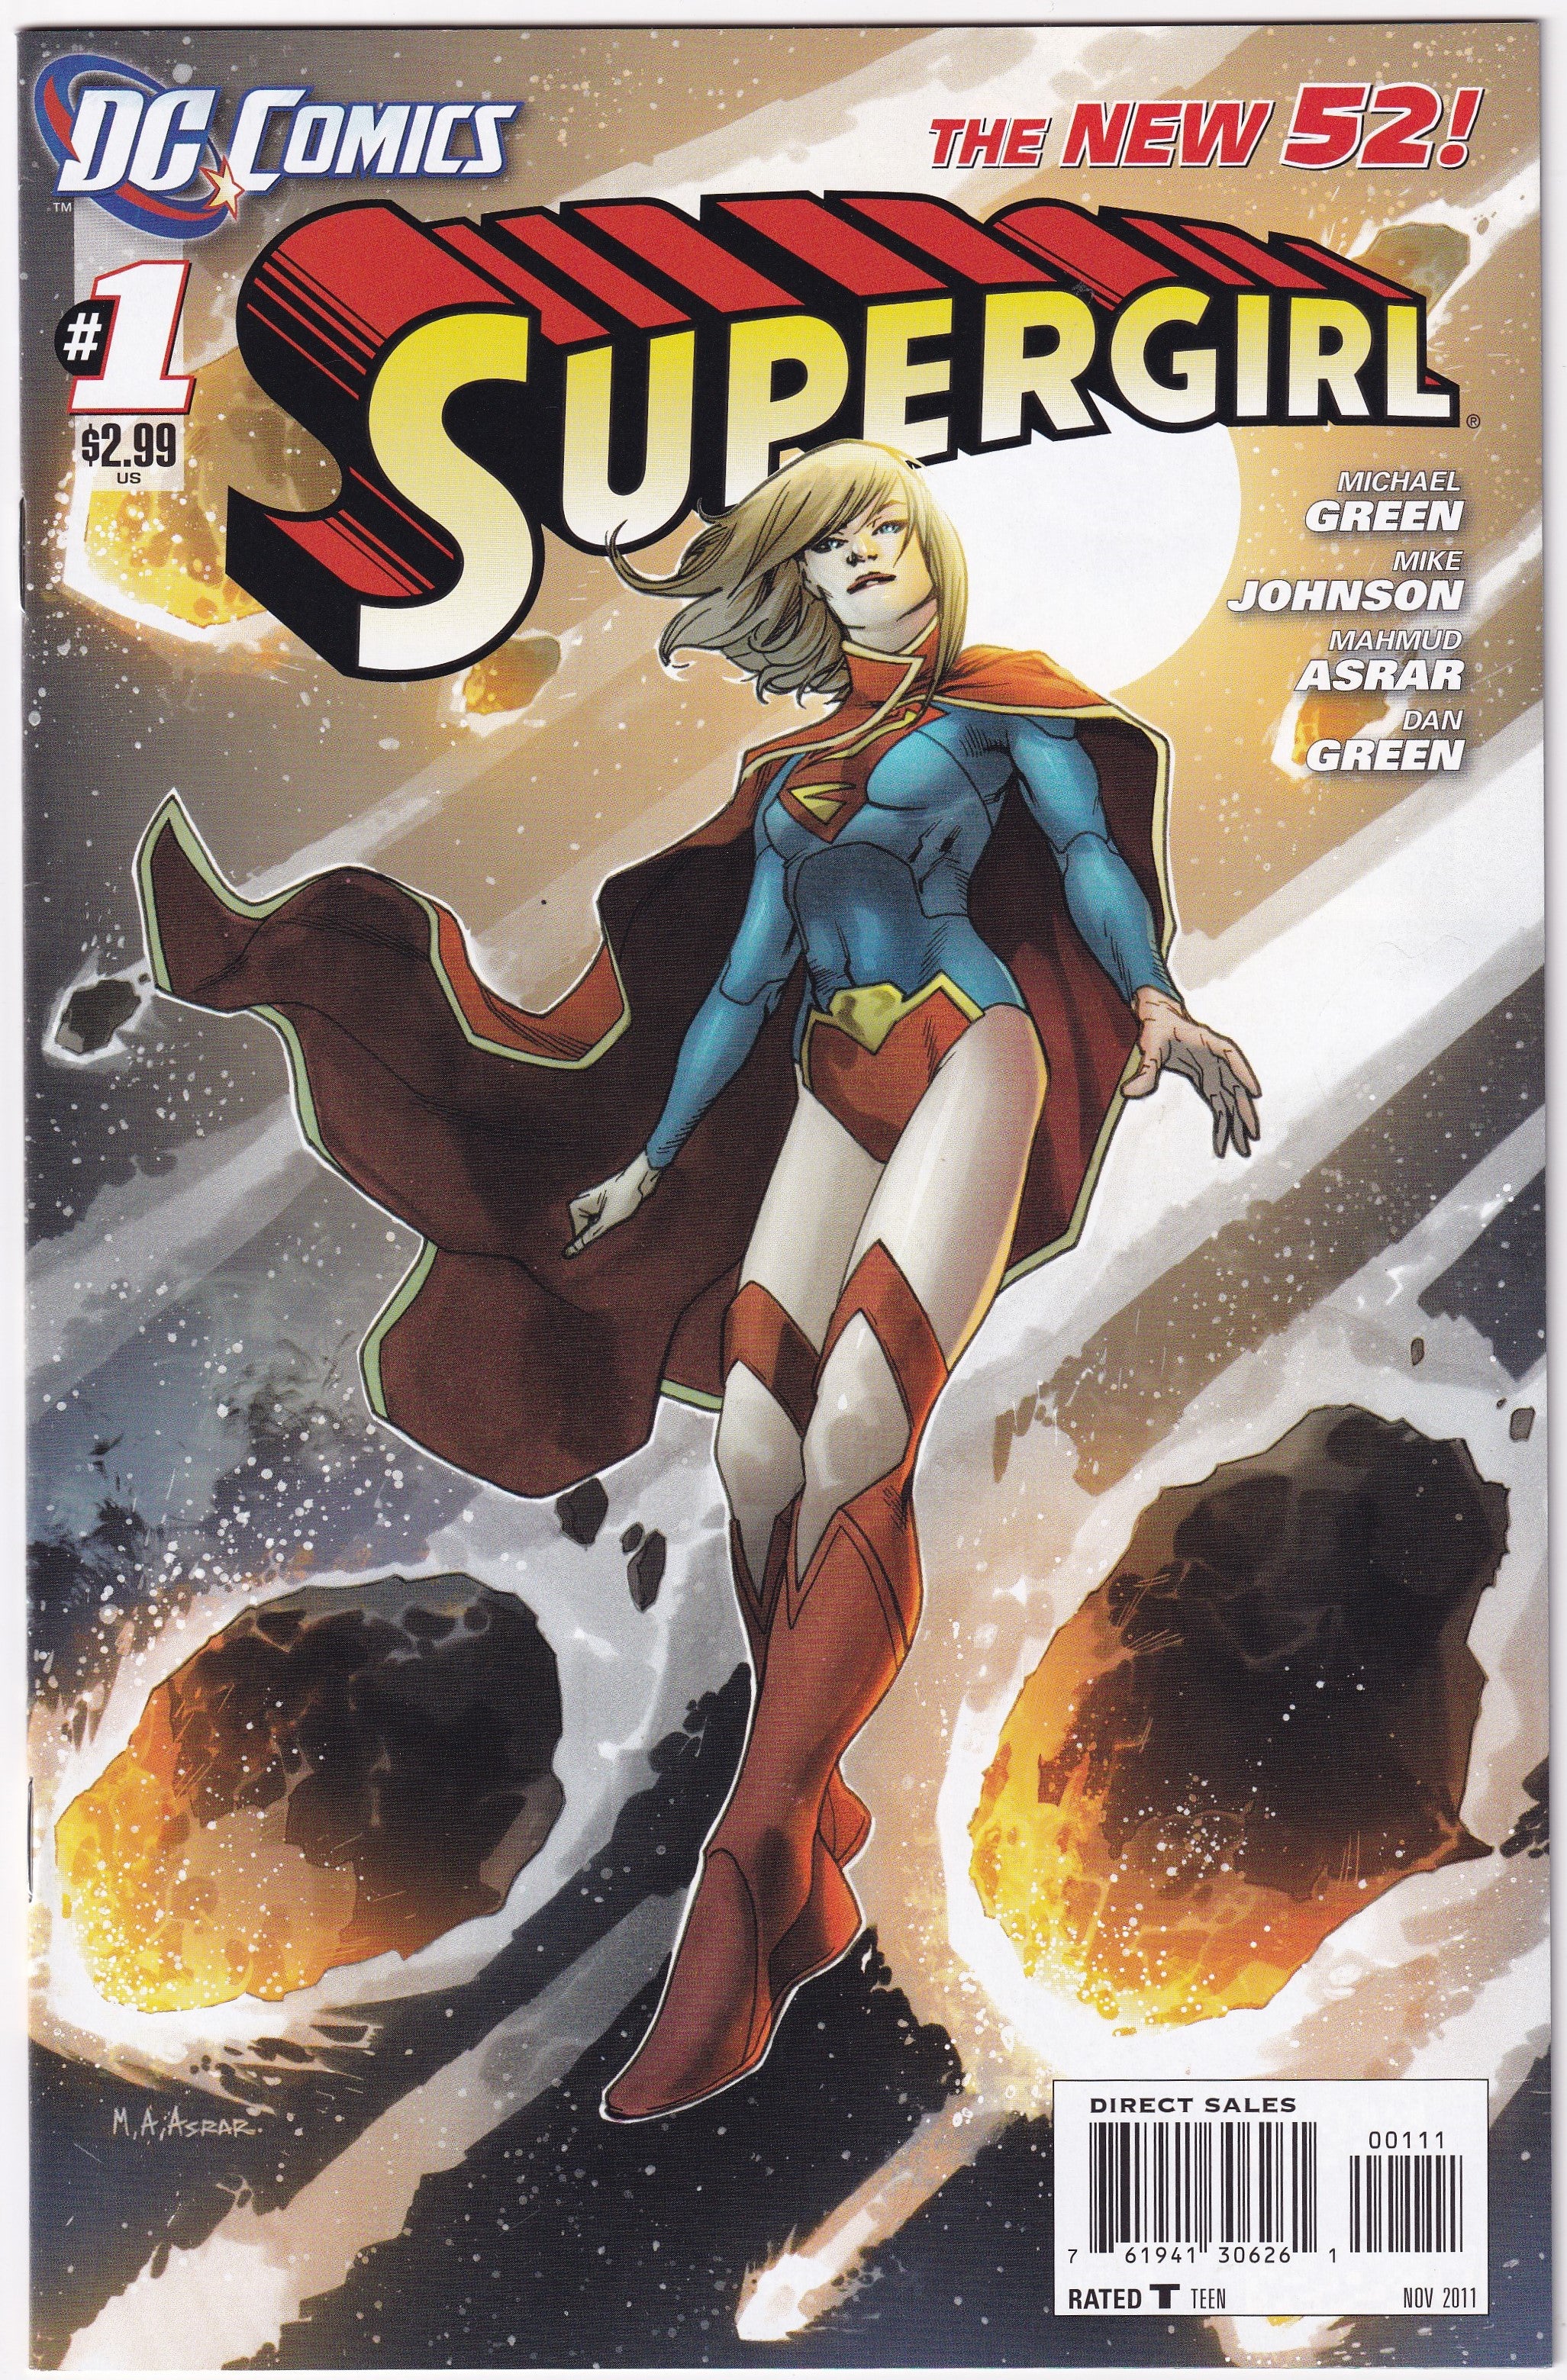 Photo of NM Supergirl V6 (11) 1A Michael Green, Mike Johnson, Mahmud A. Asrar Comic sold by Stronghold Collectibles